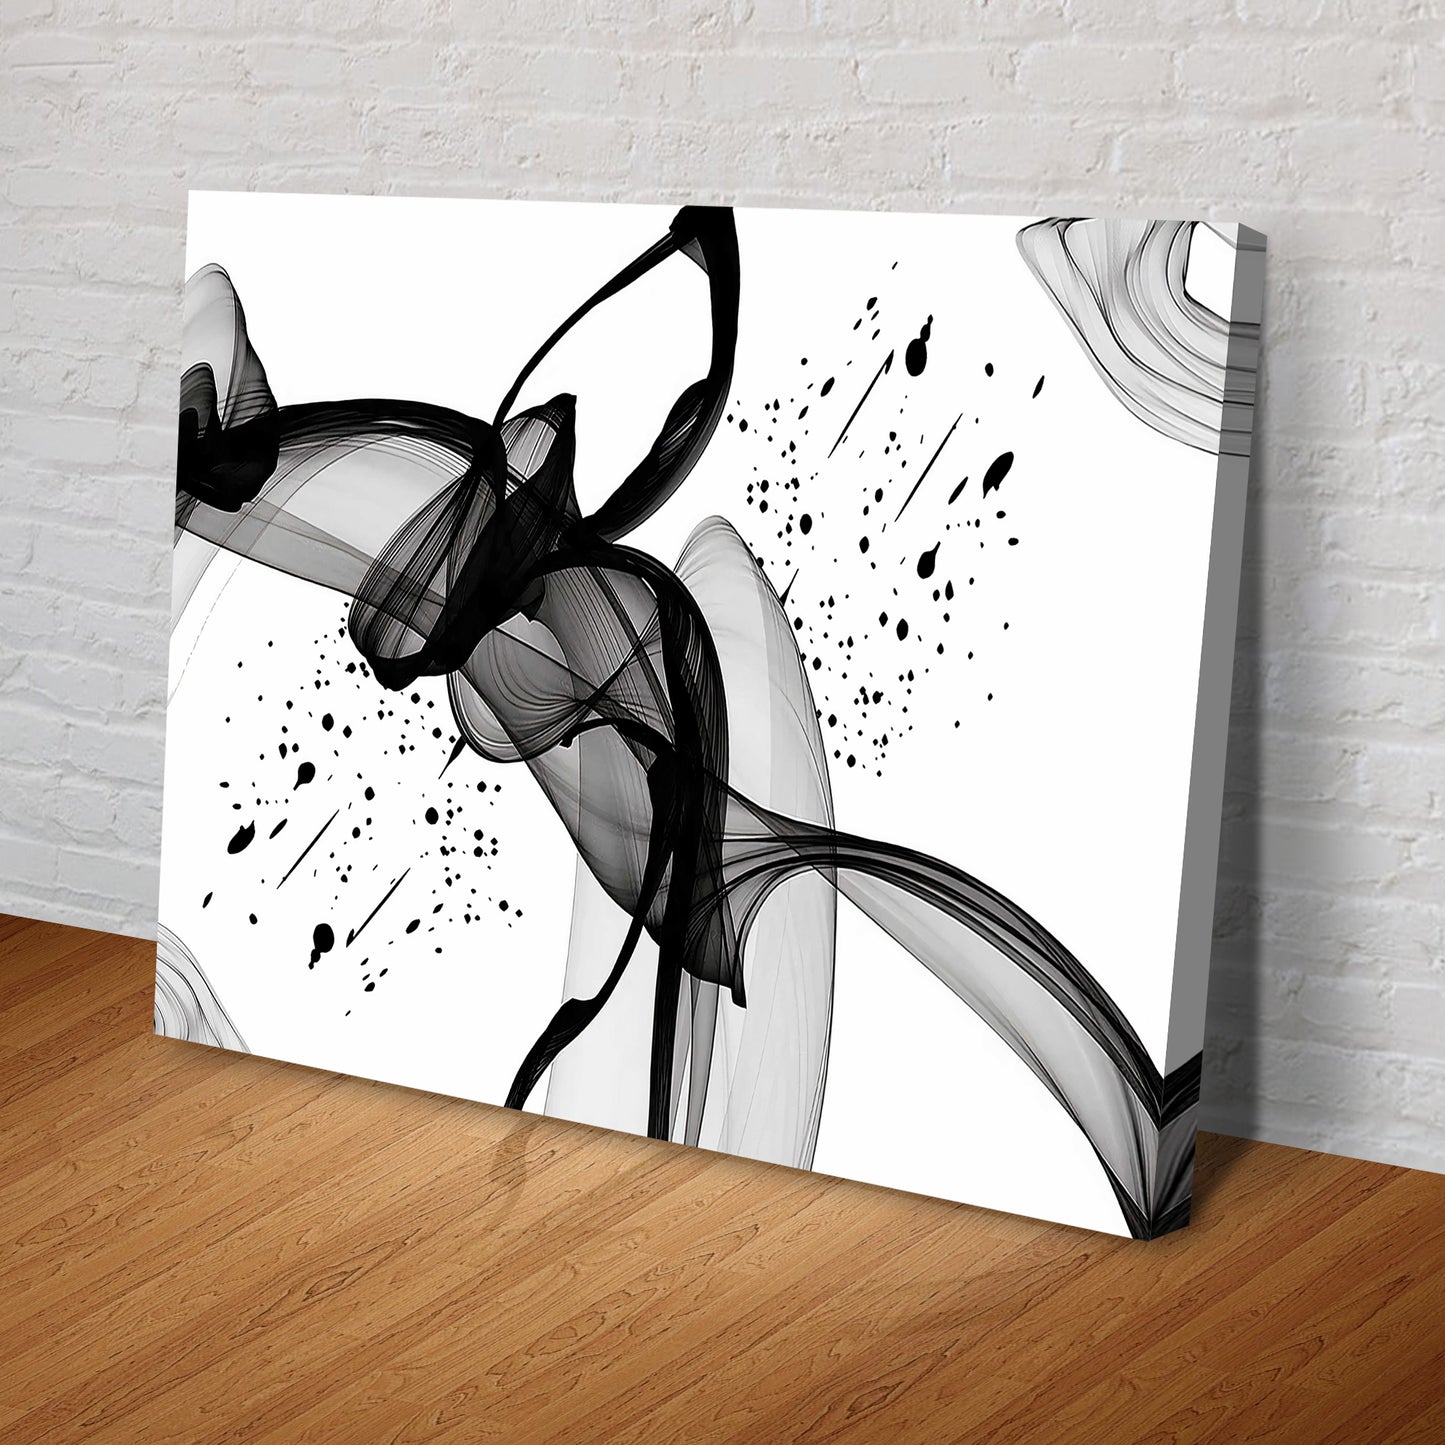 Minimalist Black Abstract Canvas Wall Art Style 1 - Image by Tailored Canvases